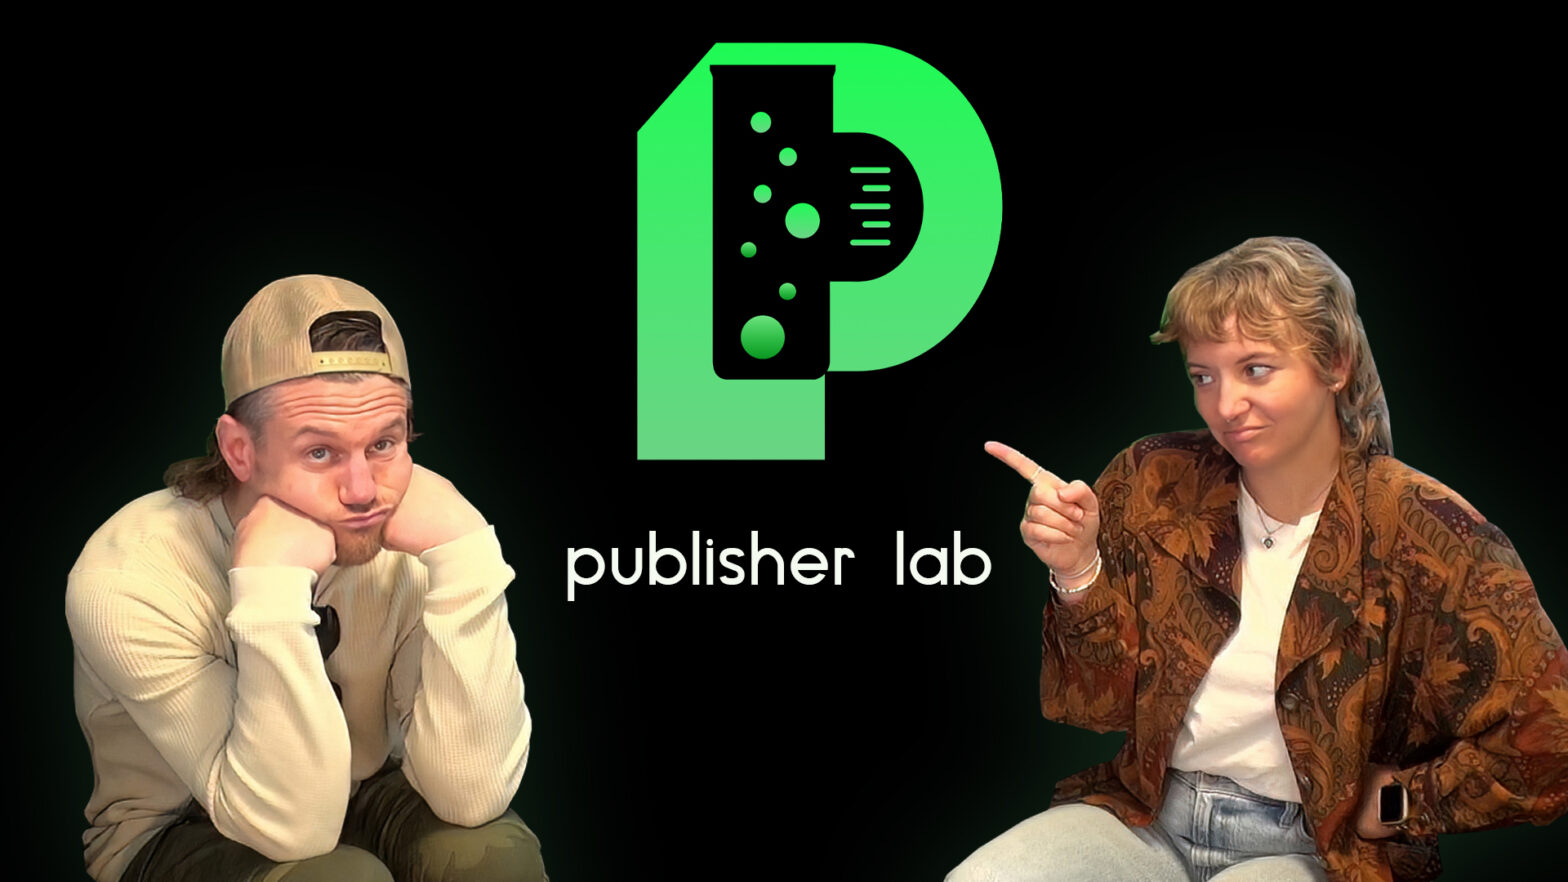 the publisher lab